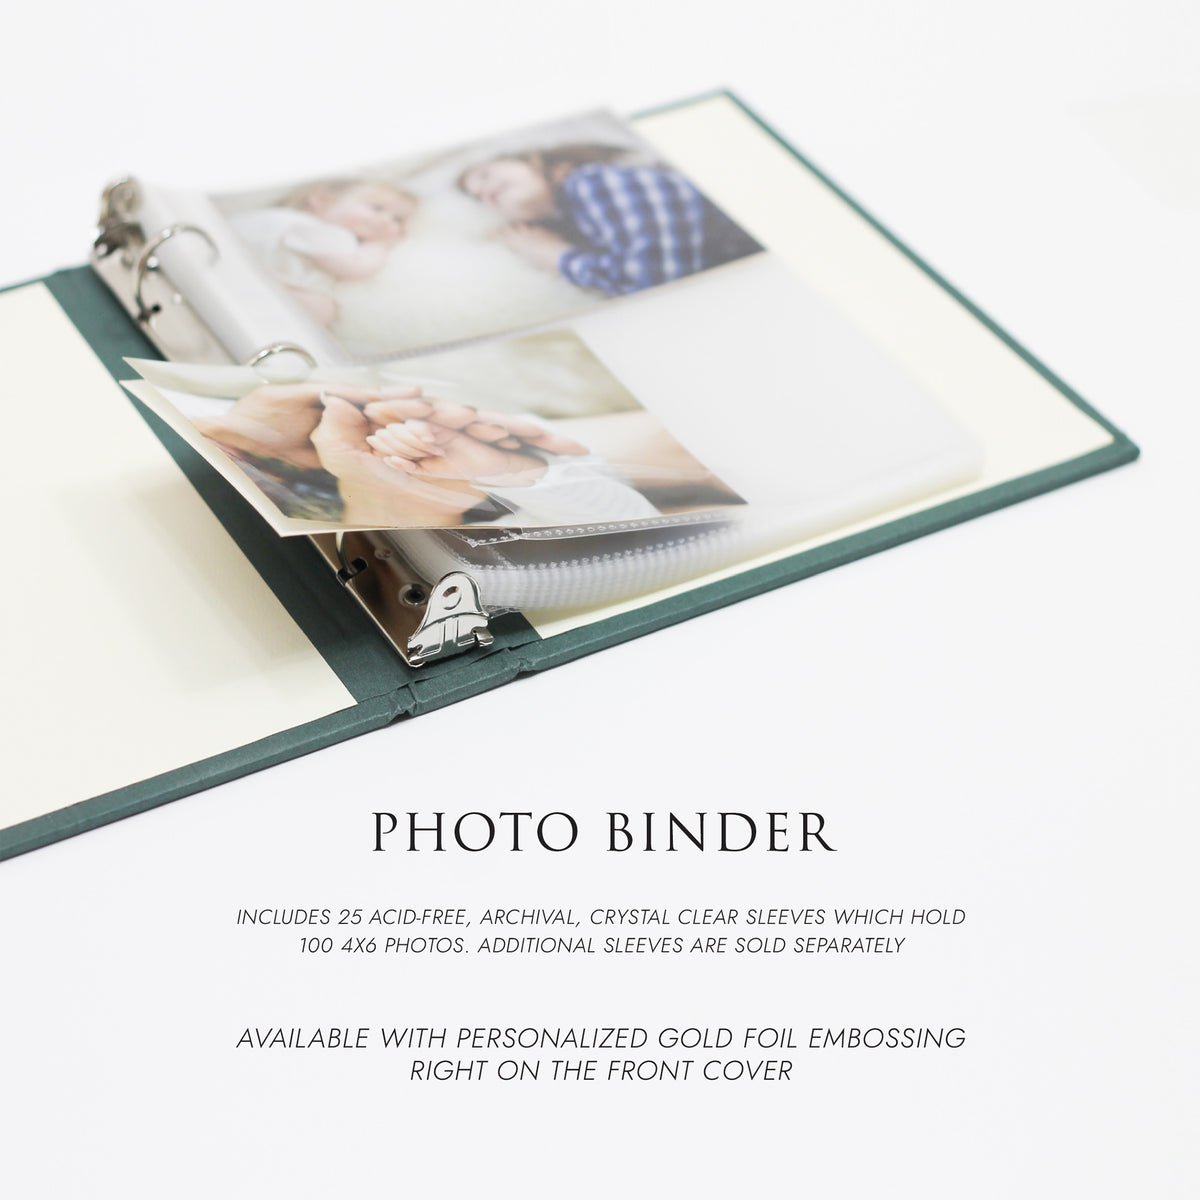 Medium Photo Binder For 4x6 Photos | Cover: Emerald Silk | Available Personalized